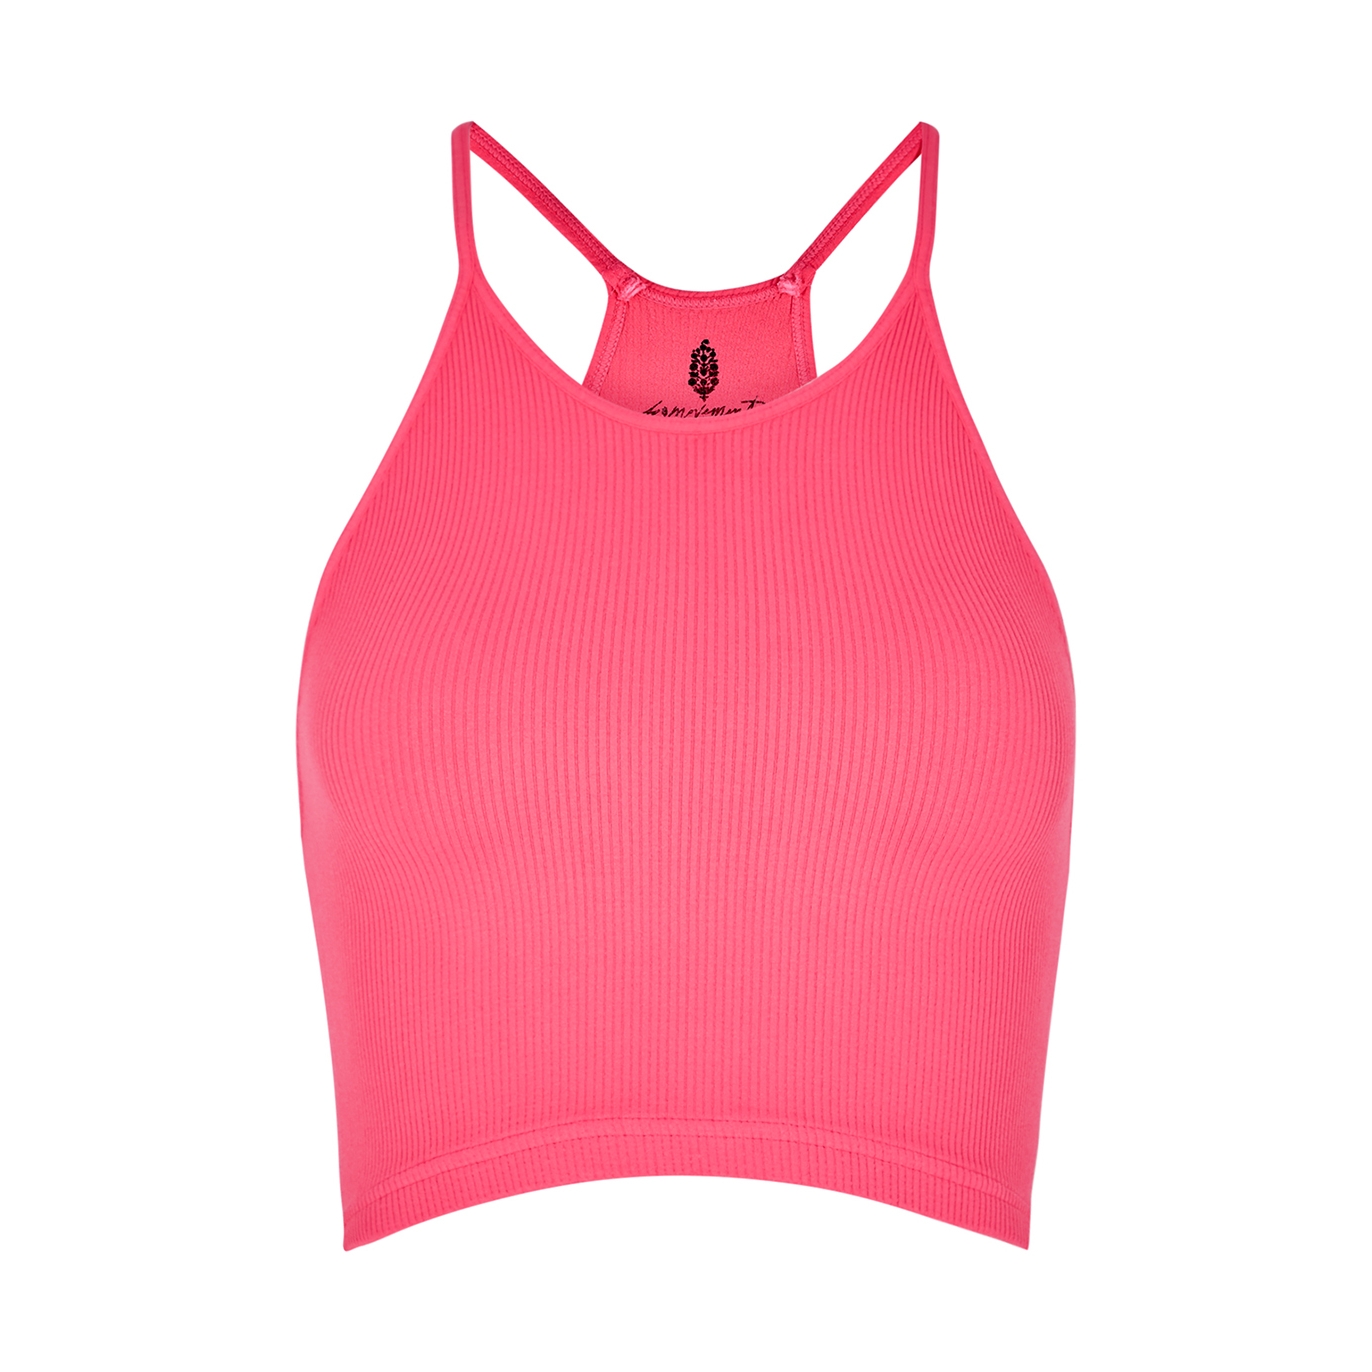 Free People Movement Run Ribbed Jersey bra top - Coral - M/L